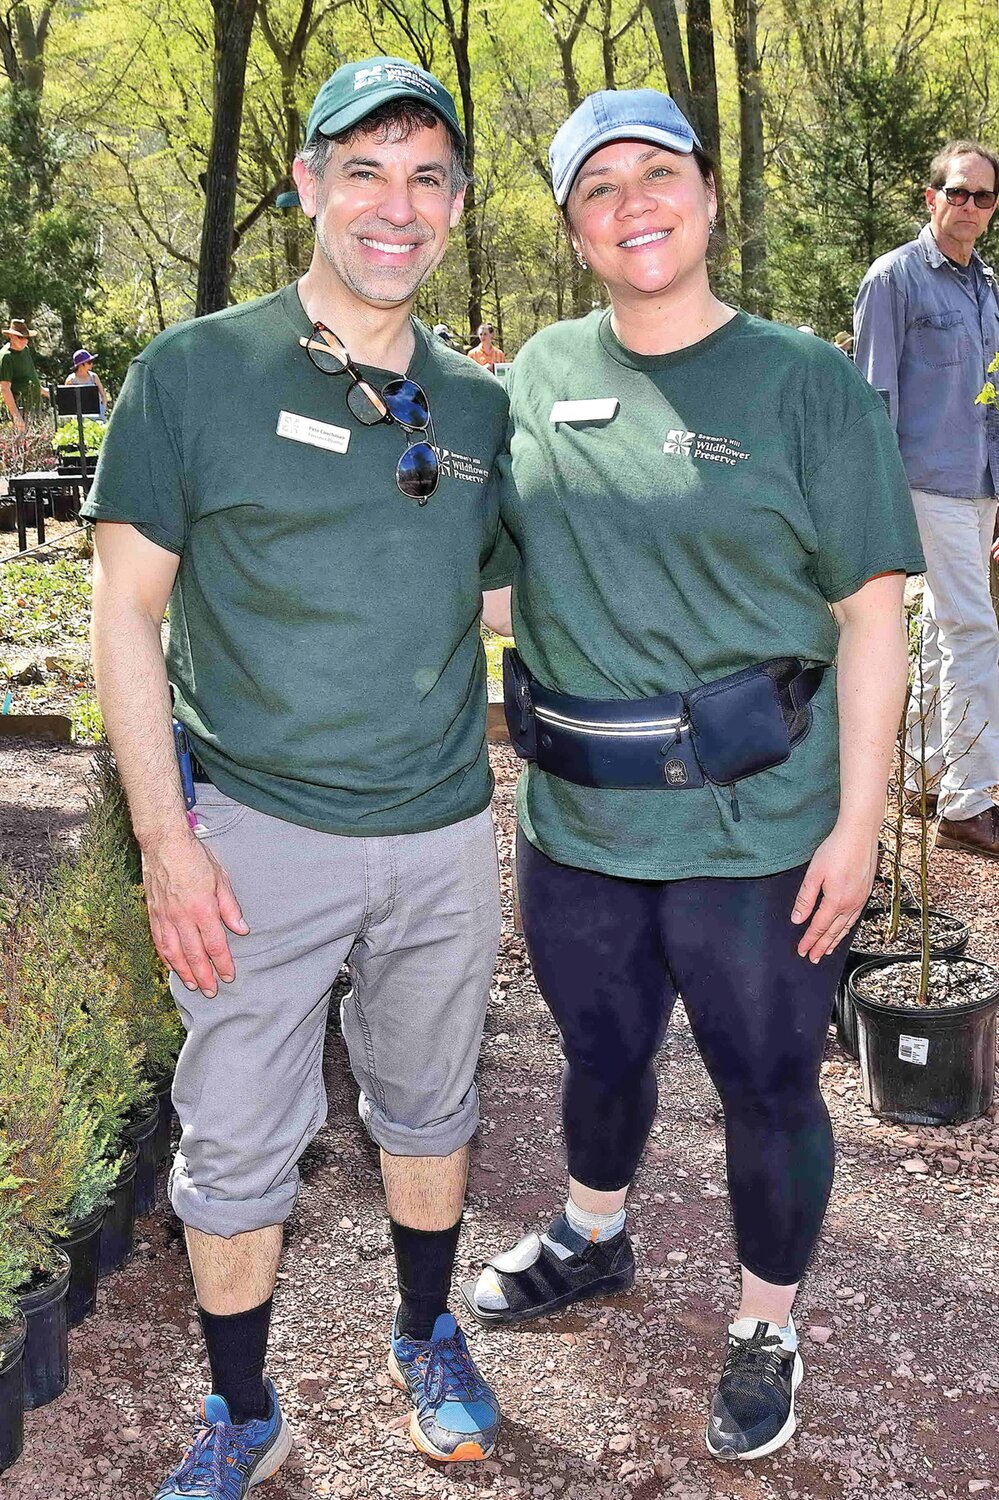 Peter Couchman, executive director of Bowman’s Hill Wildflower Preserve, and Sarah Norris, director of donor and partner relations.